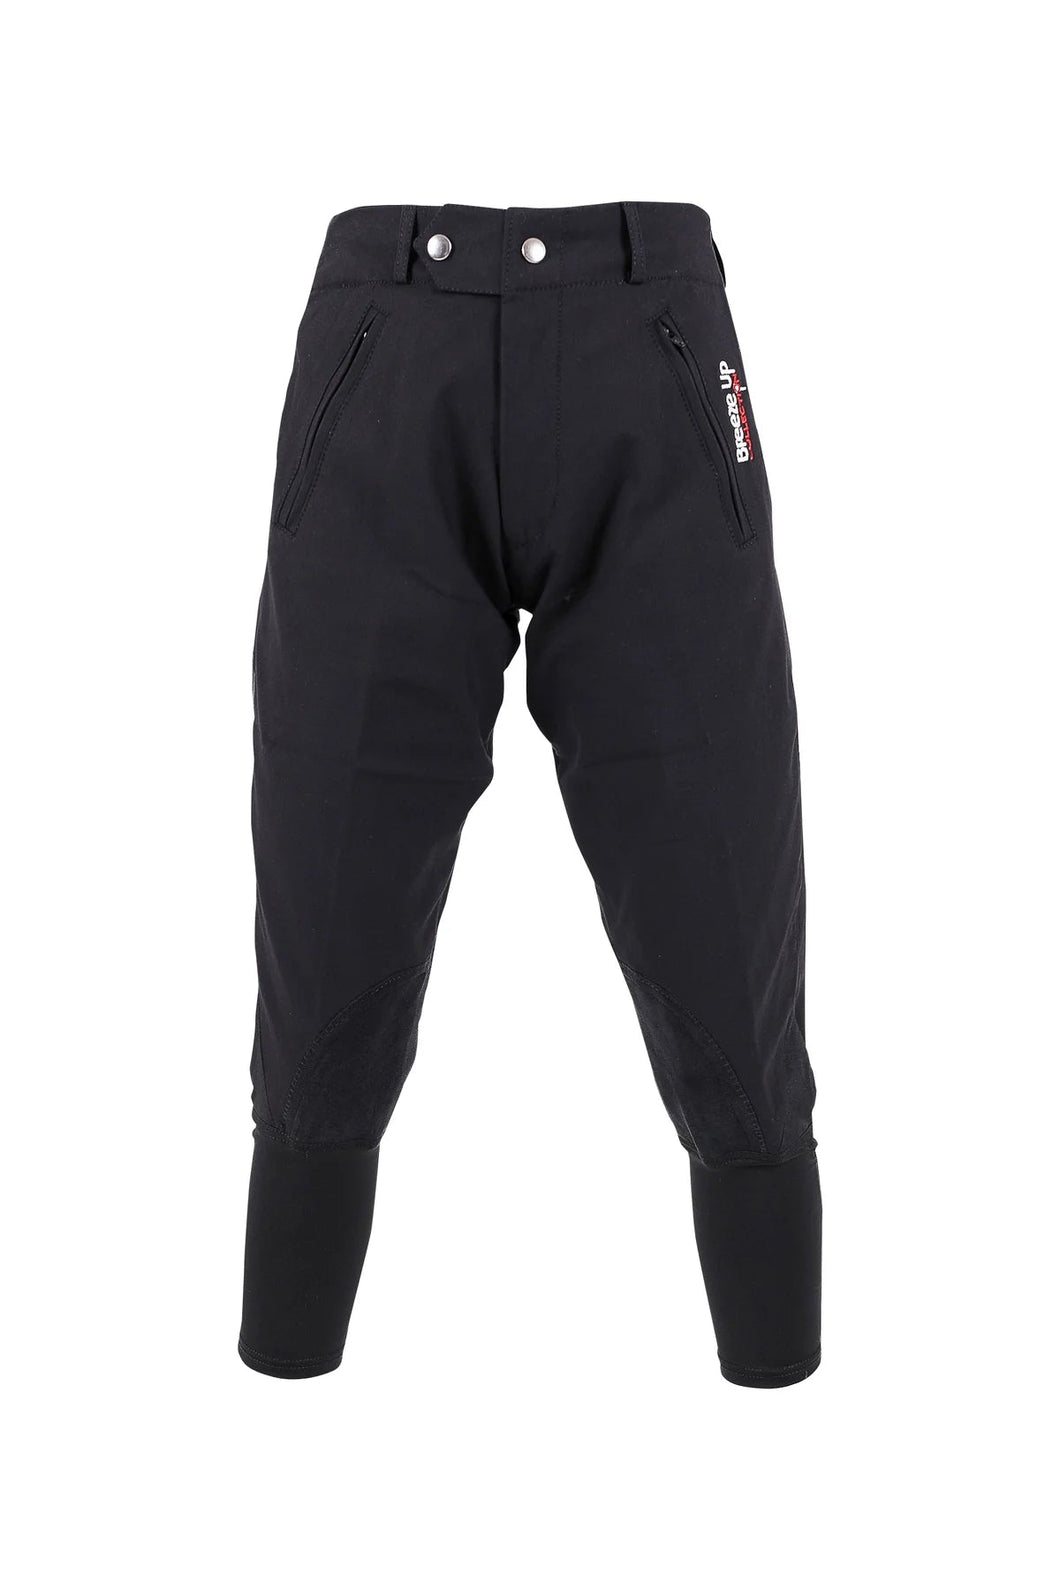 Breeze Up 3/4 Length Exercise Breeches